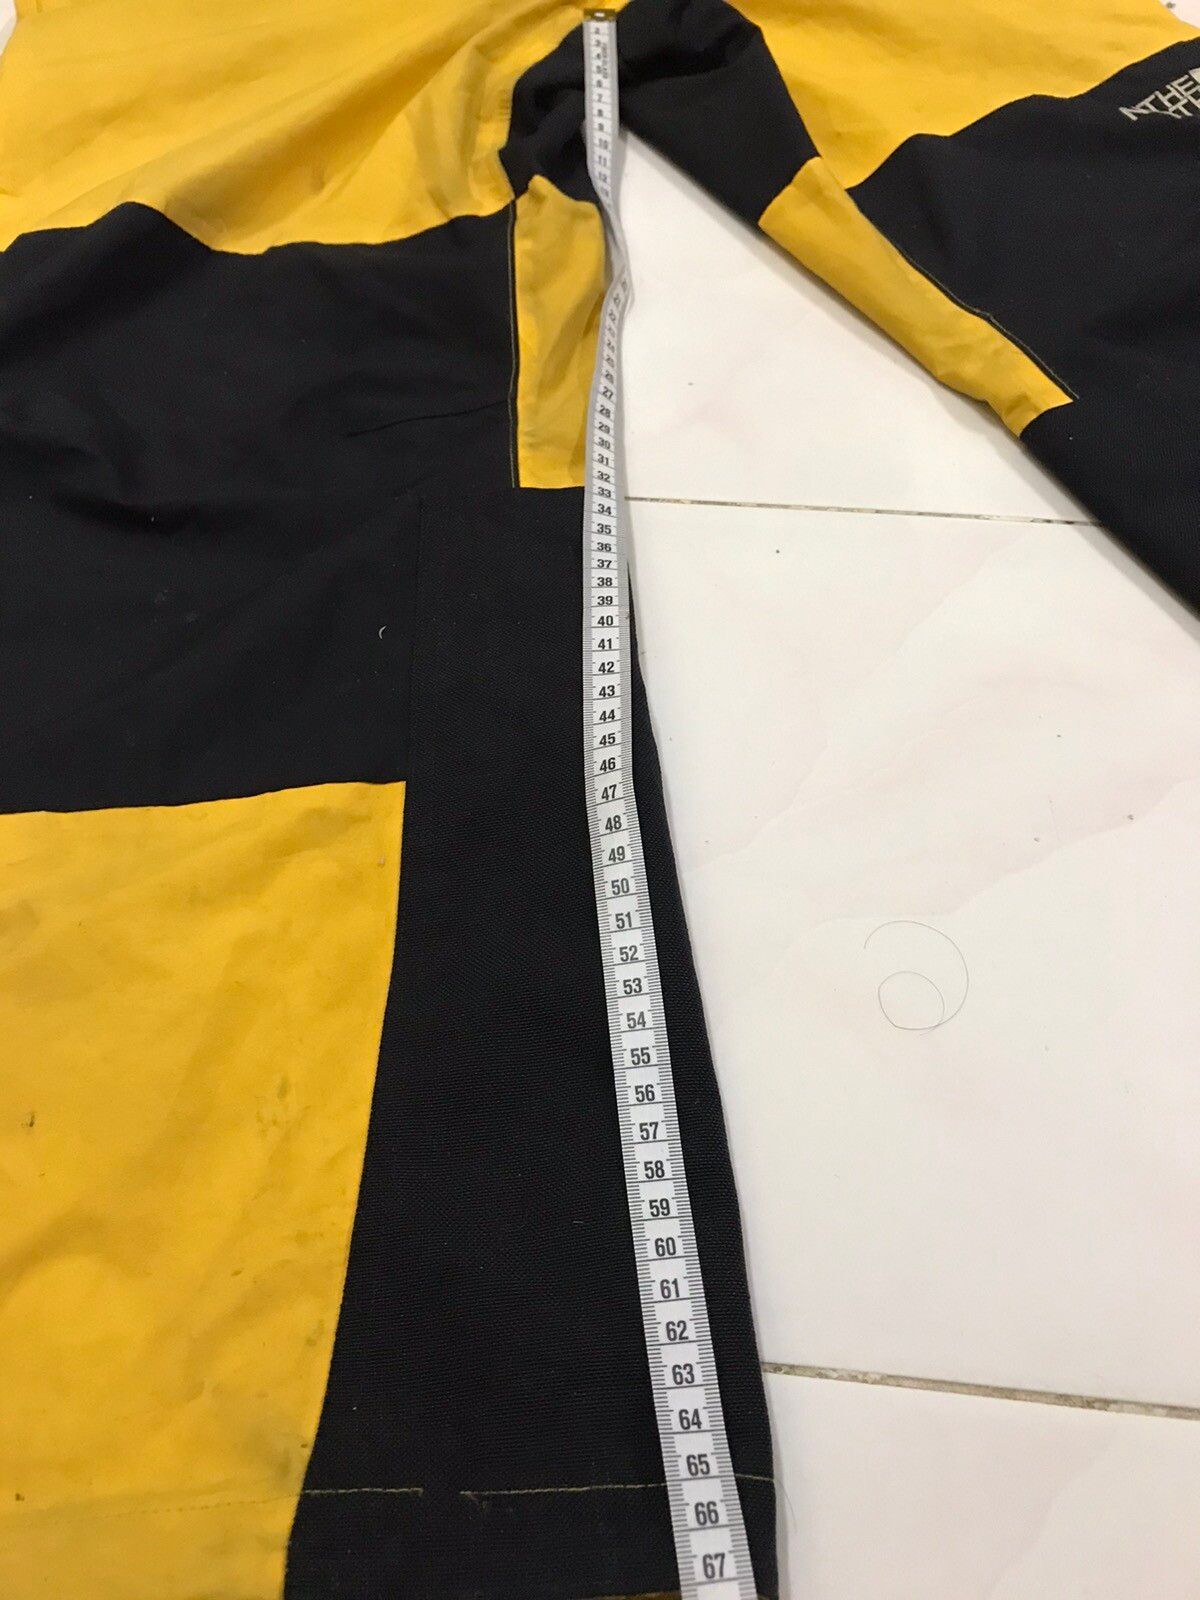 THE NORTH FACE” GORE-TEX SKI PANTS BIBS OVERALLS IN YELLOW - 11